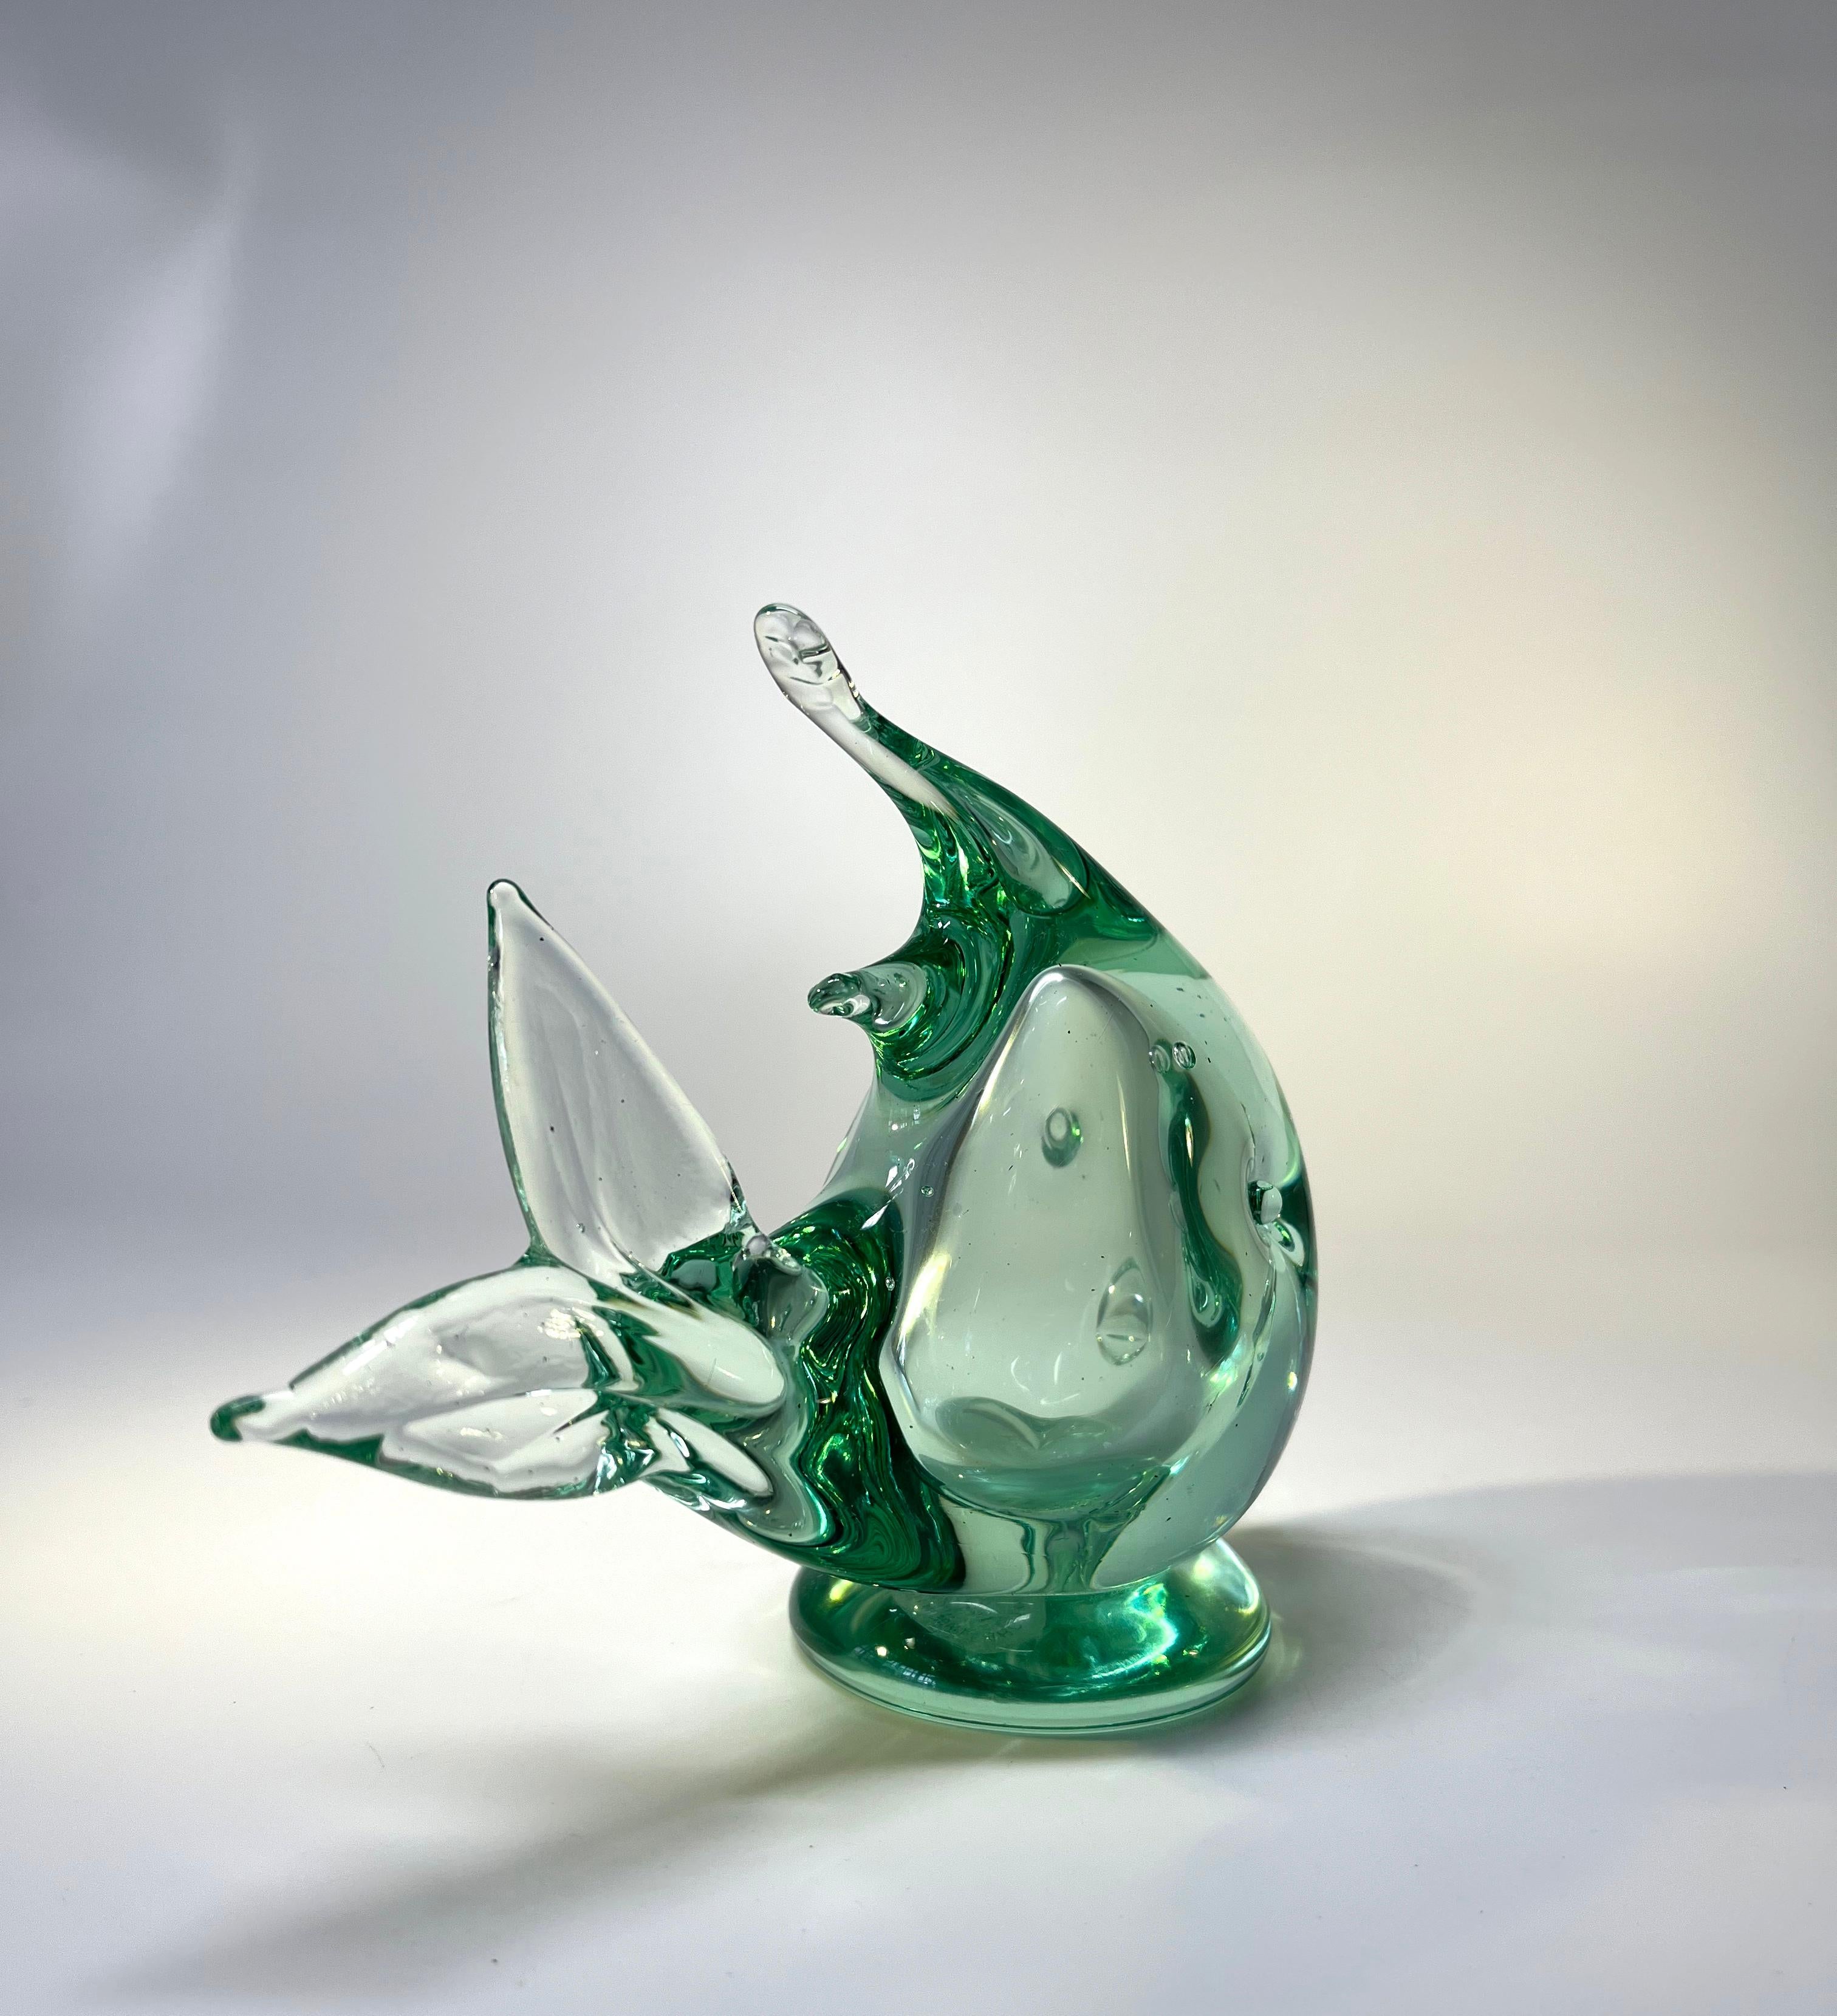 Hand-Crafted Ocean Green Murano Glass Angel Fish By Archimede Seguso, Italy 1970's For Sale